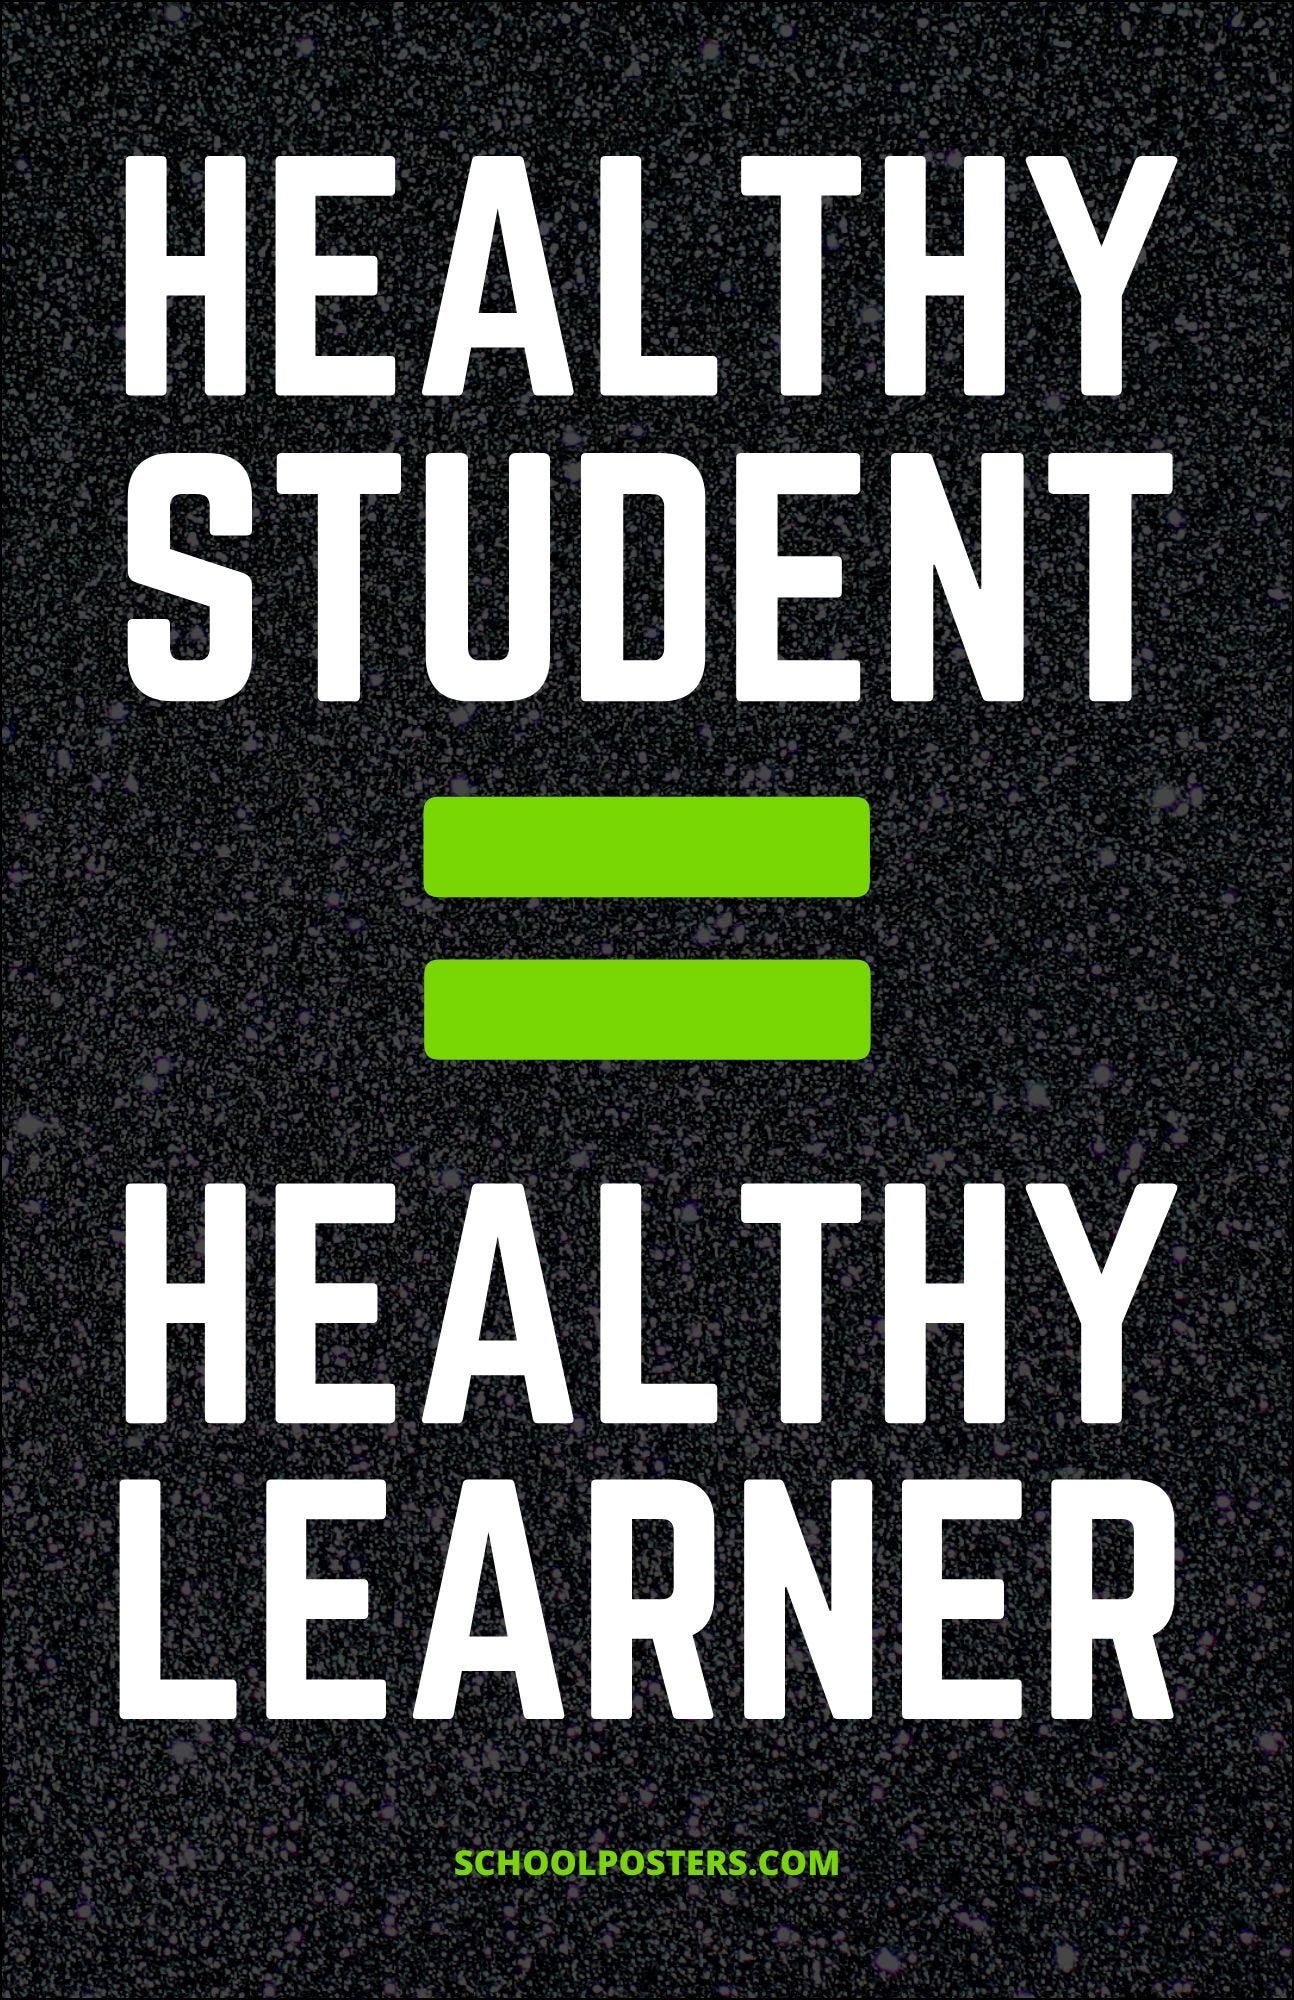 Healthy Student Equals Healthy Learner Poster